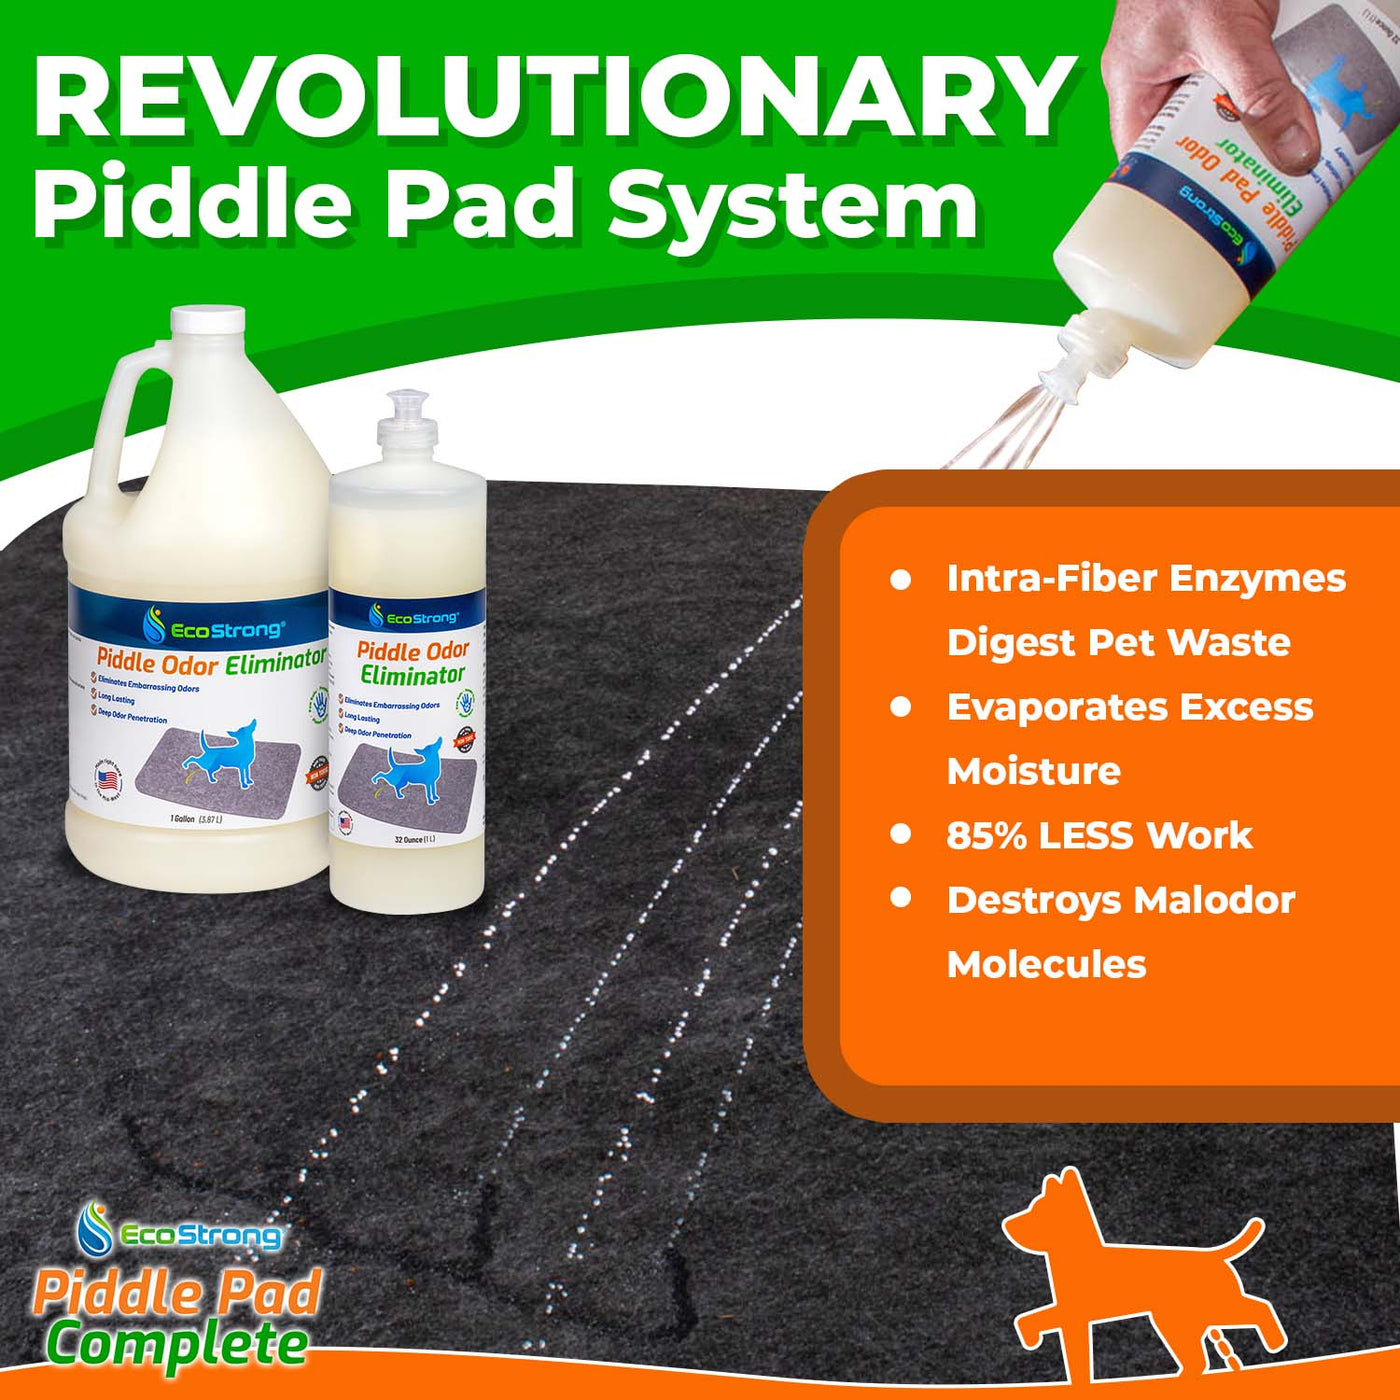 EcoStrong Piddle Pad Complete#size_two-36-x-42-inch-pads-and-32-oz-piddle-odor-eliminator